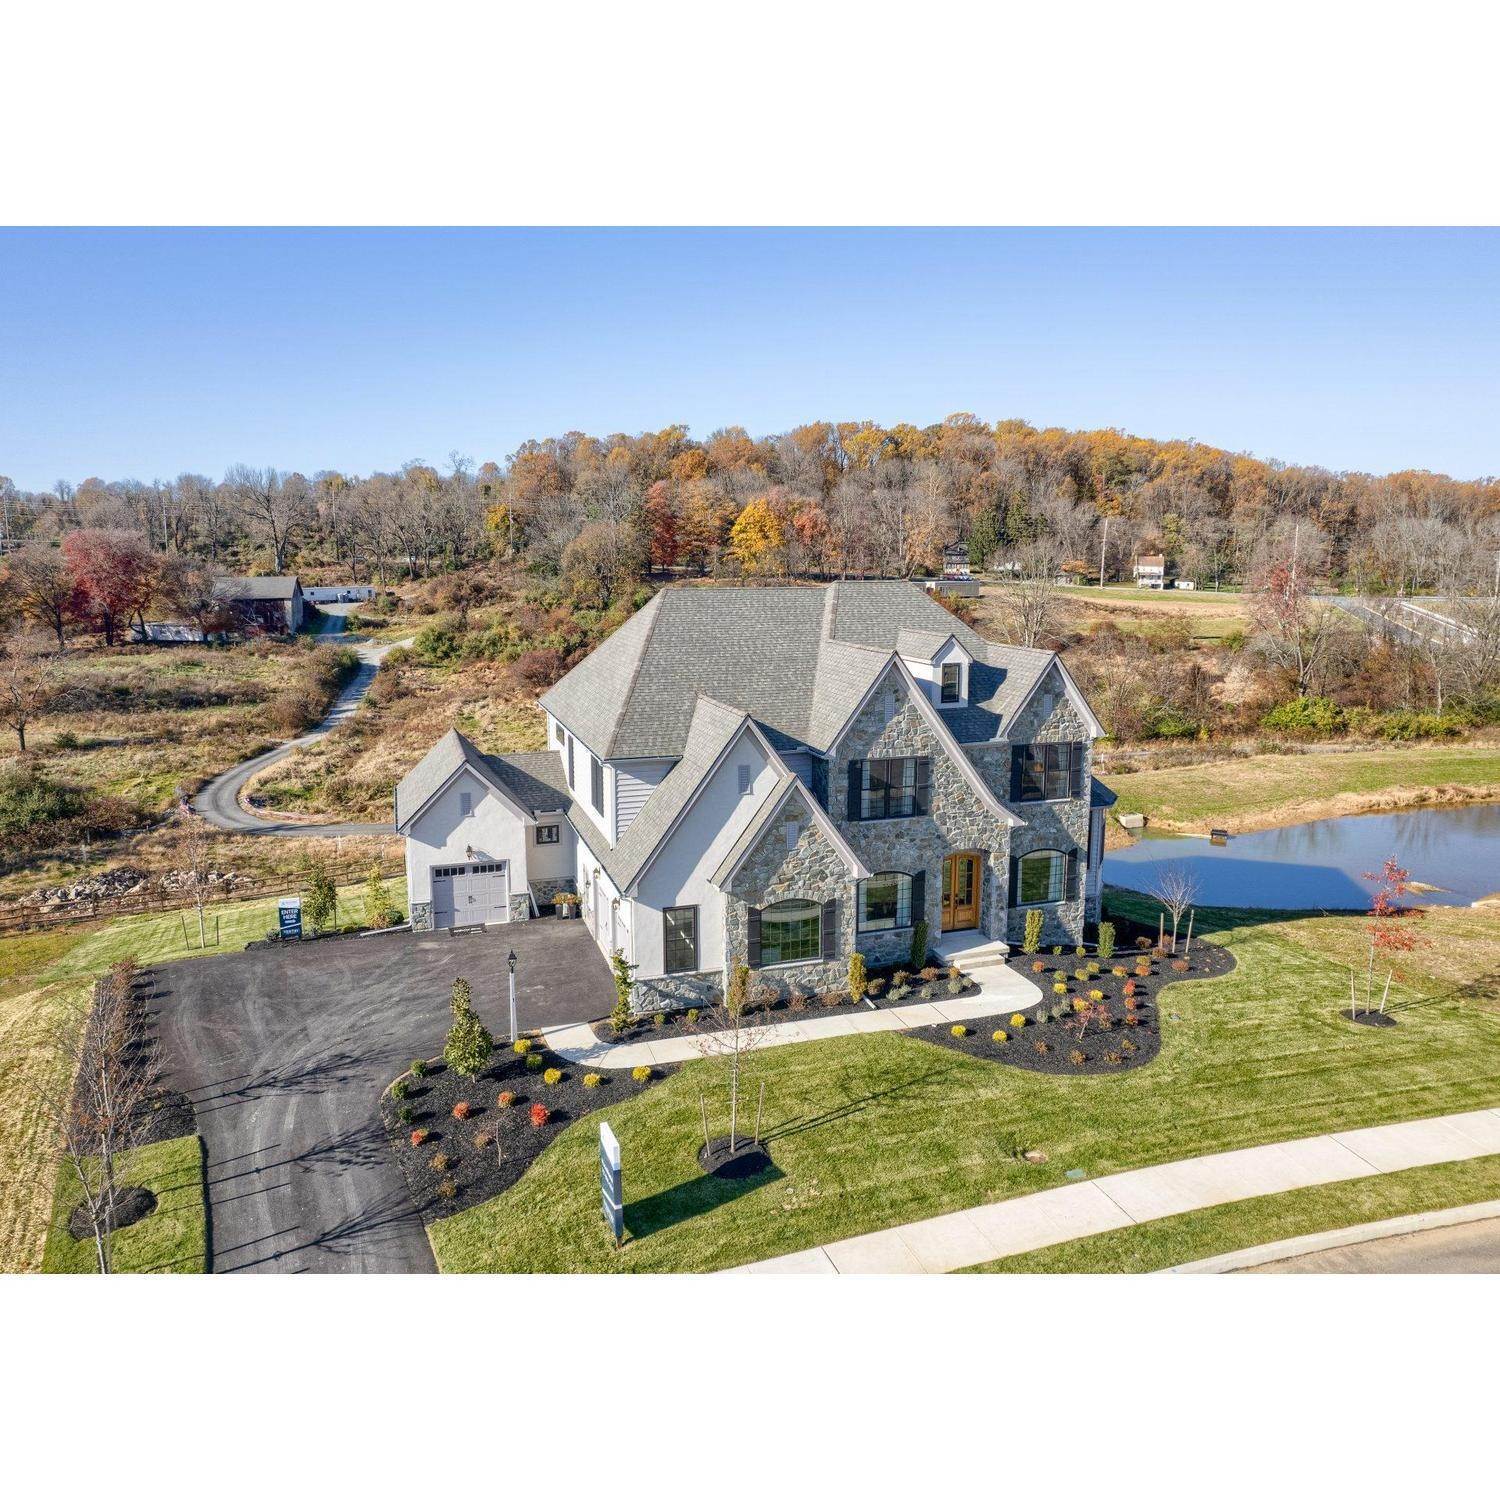 39. 101 Parkview Way, Newtown Square, PA 19073에 Ventry at Edgmont Preserve 건물